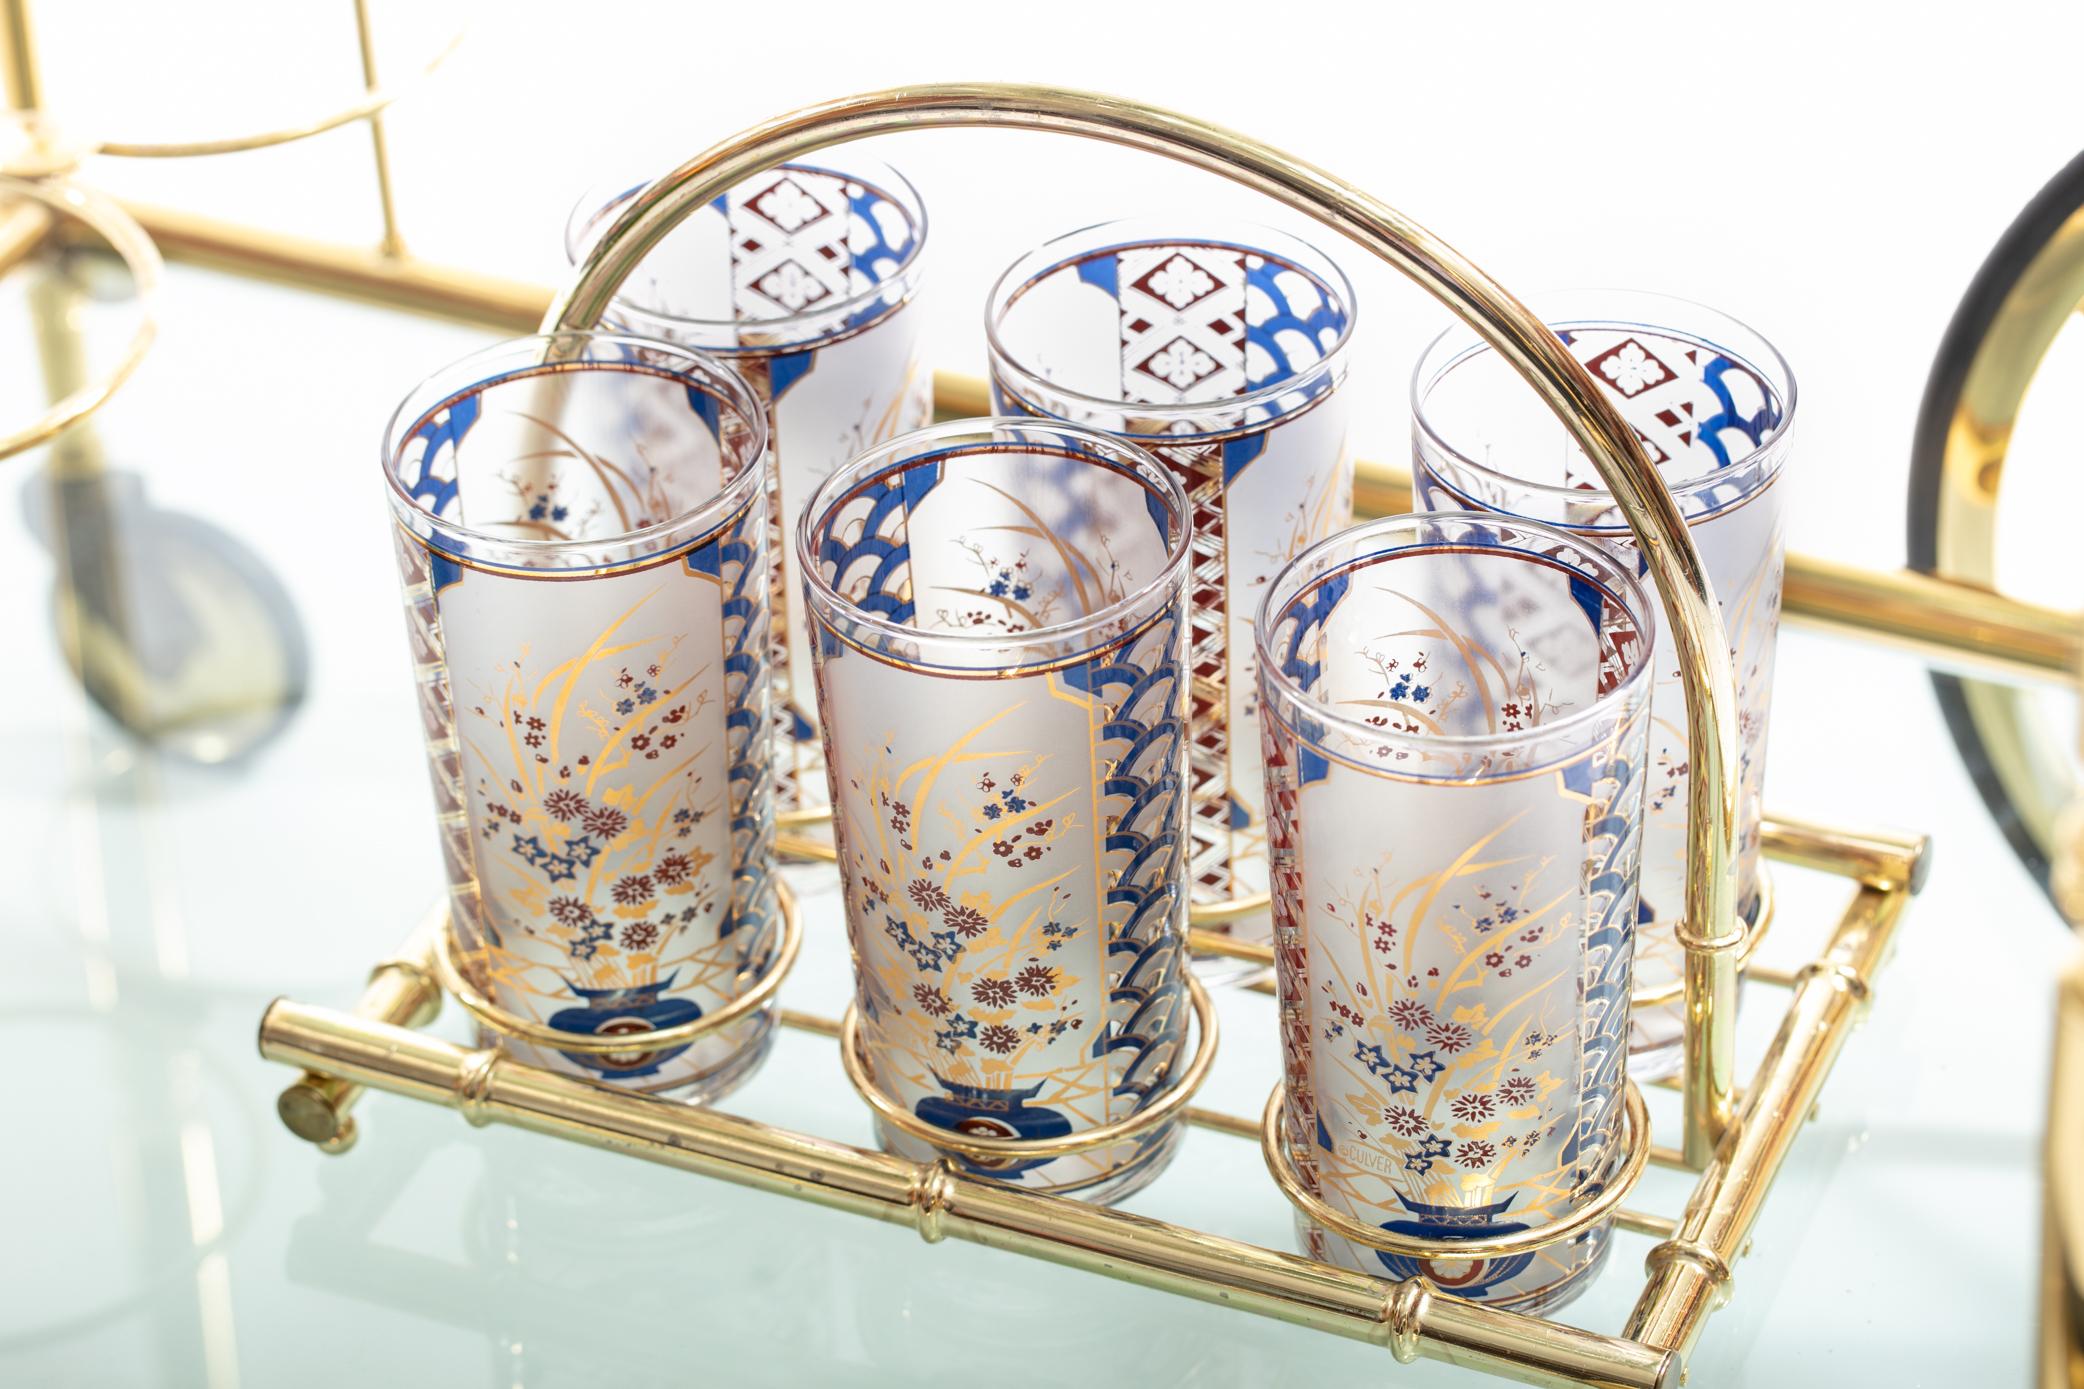 Vintage set of Chinoiserie pattern tumblers by Culver with 22-karat gold plating and matching brass bamboo caddy. Beautiful and unique addition for display on your bar cart or formal bar. Our shop carries additional pieces in this pattern so please